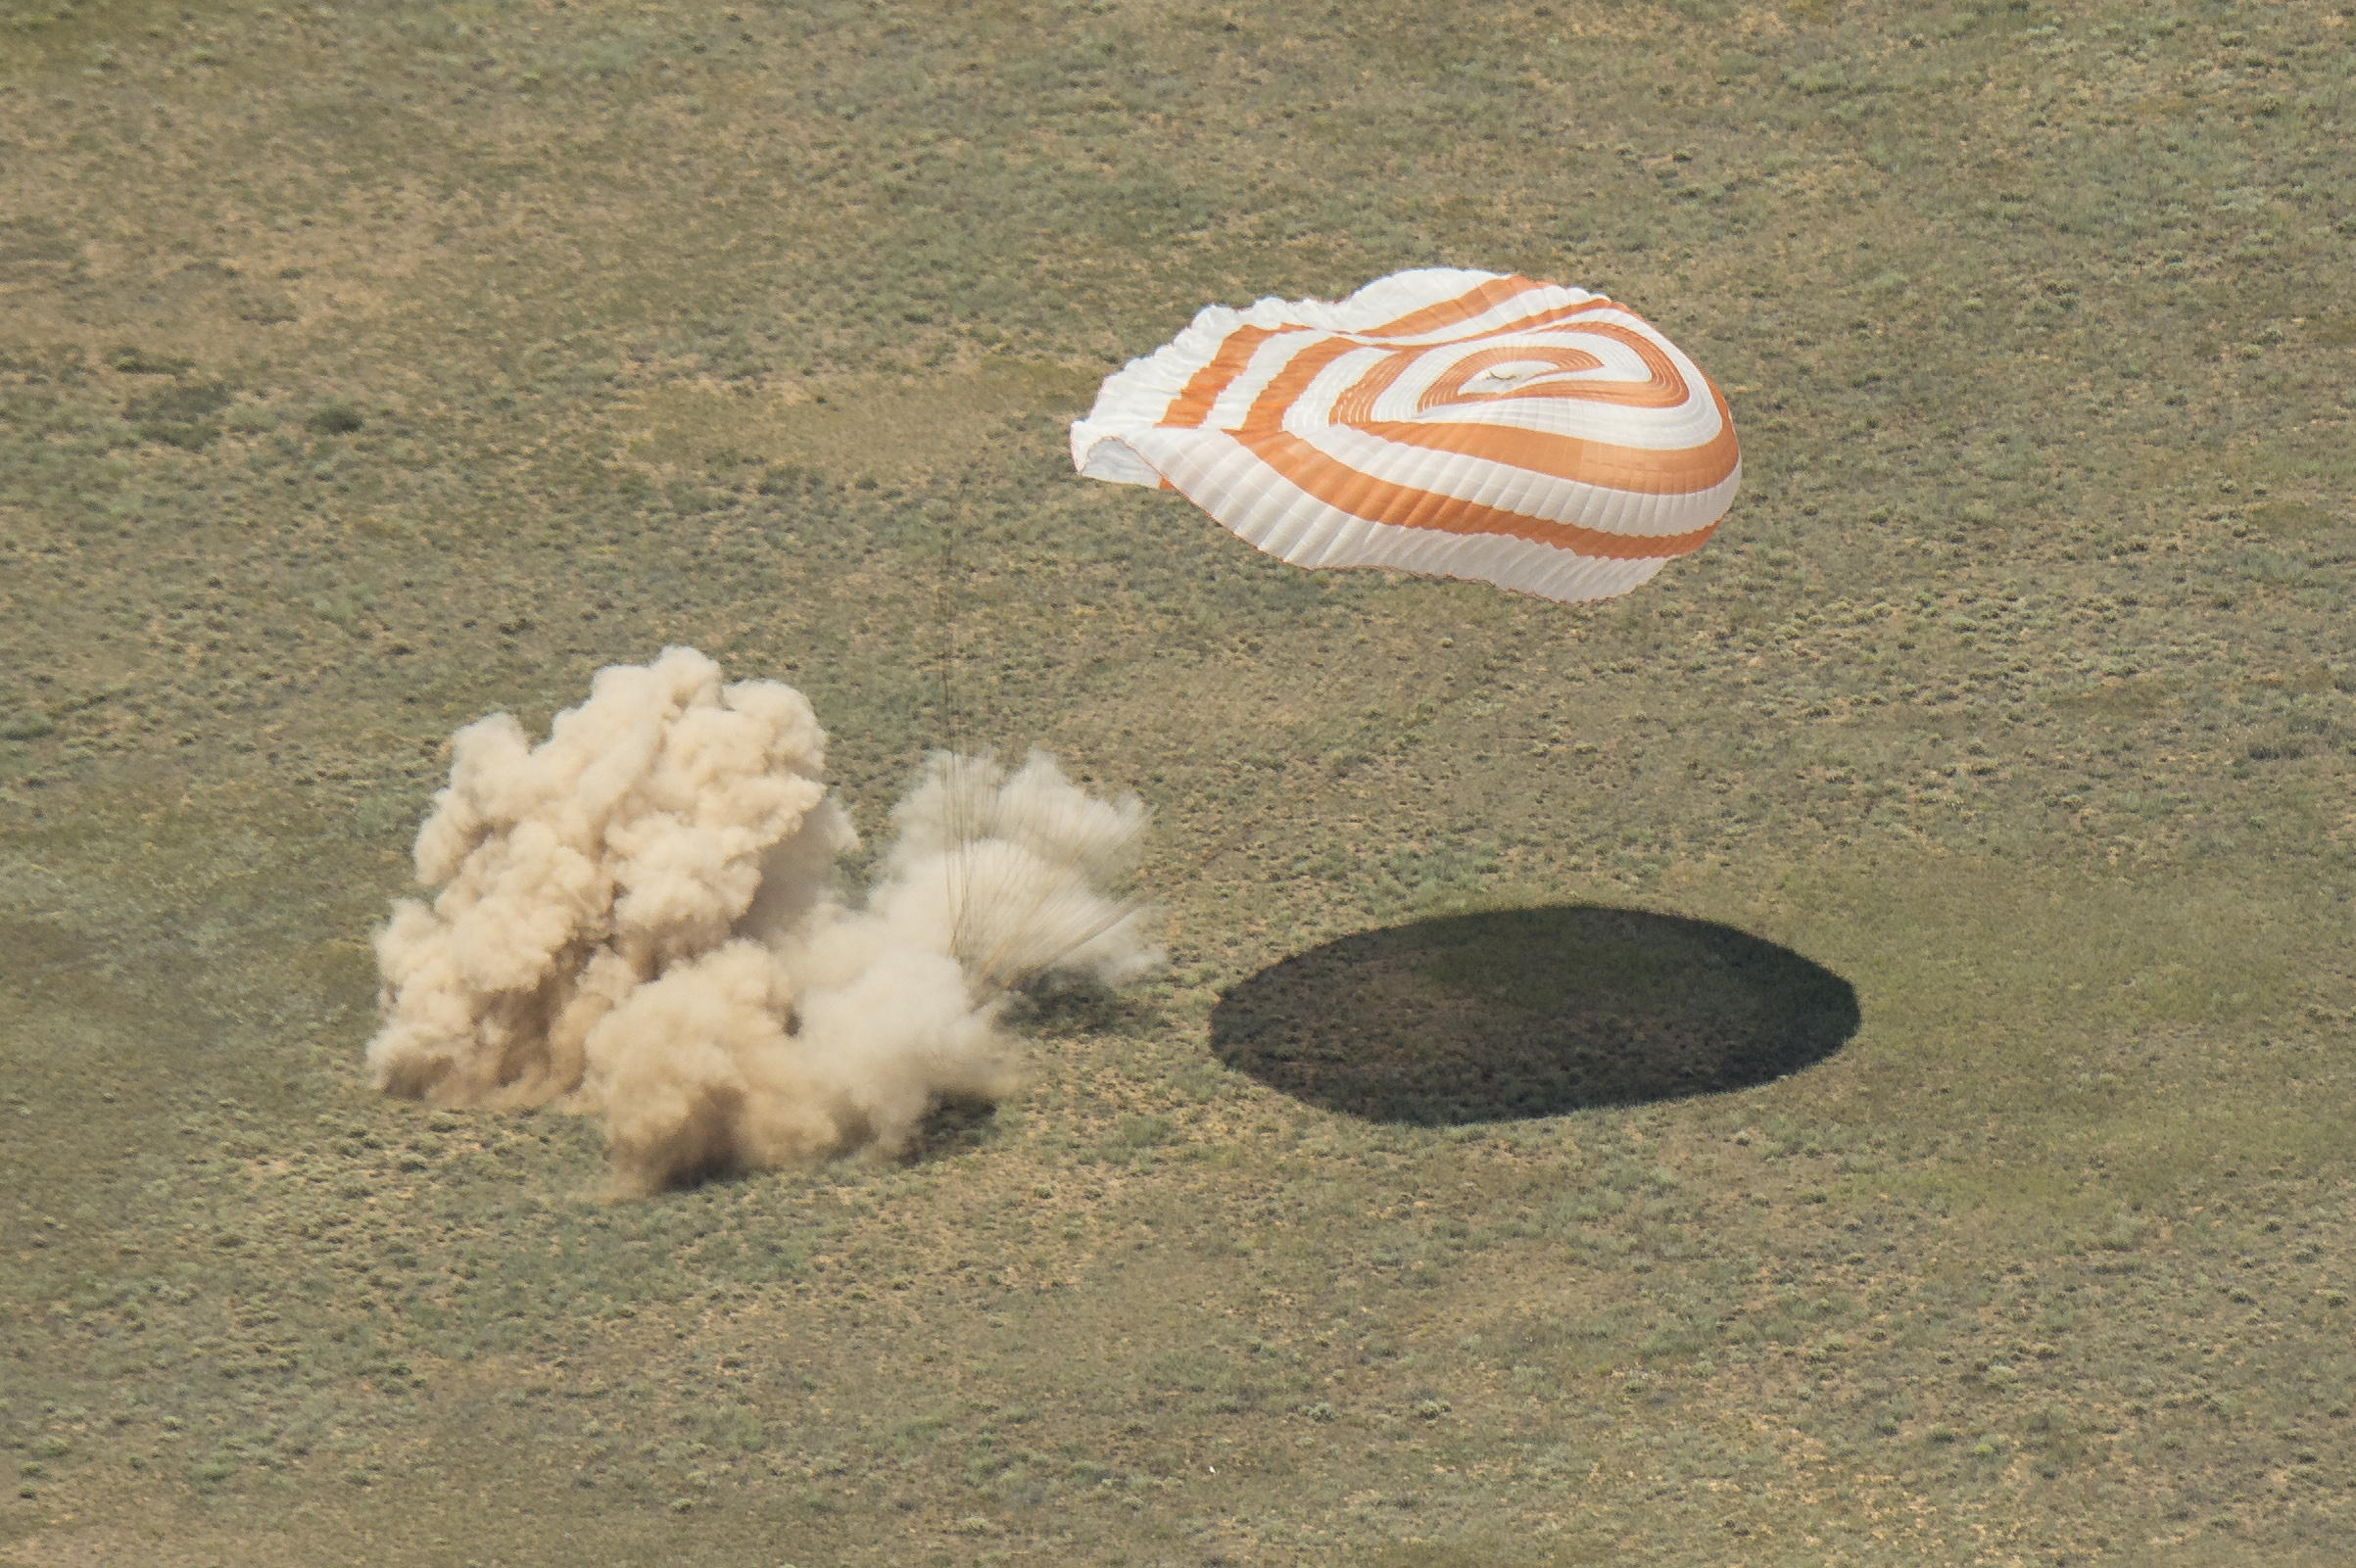 The Soyuz TMA-19M spacecraft is seen as it lands with Expedition 47 crew members Tim Kopra of NASA, Tim Peake of the European Space Agency, and Yuri Malenchenko of Roscosmos near the town of Zhezkazgan, Kazakhstan on Saturday, June 18, 2016. Kopra, Peake, and Malenchenko are returning after six months in space where they served as members of the Expedition 46 and 47 crews onboard the International Space Station. Photo Credit: NASA/Bill Ingalls